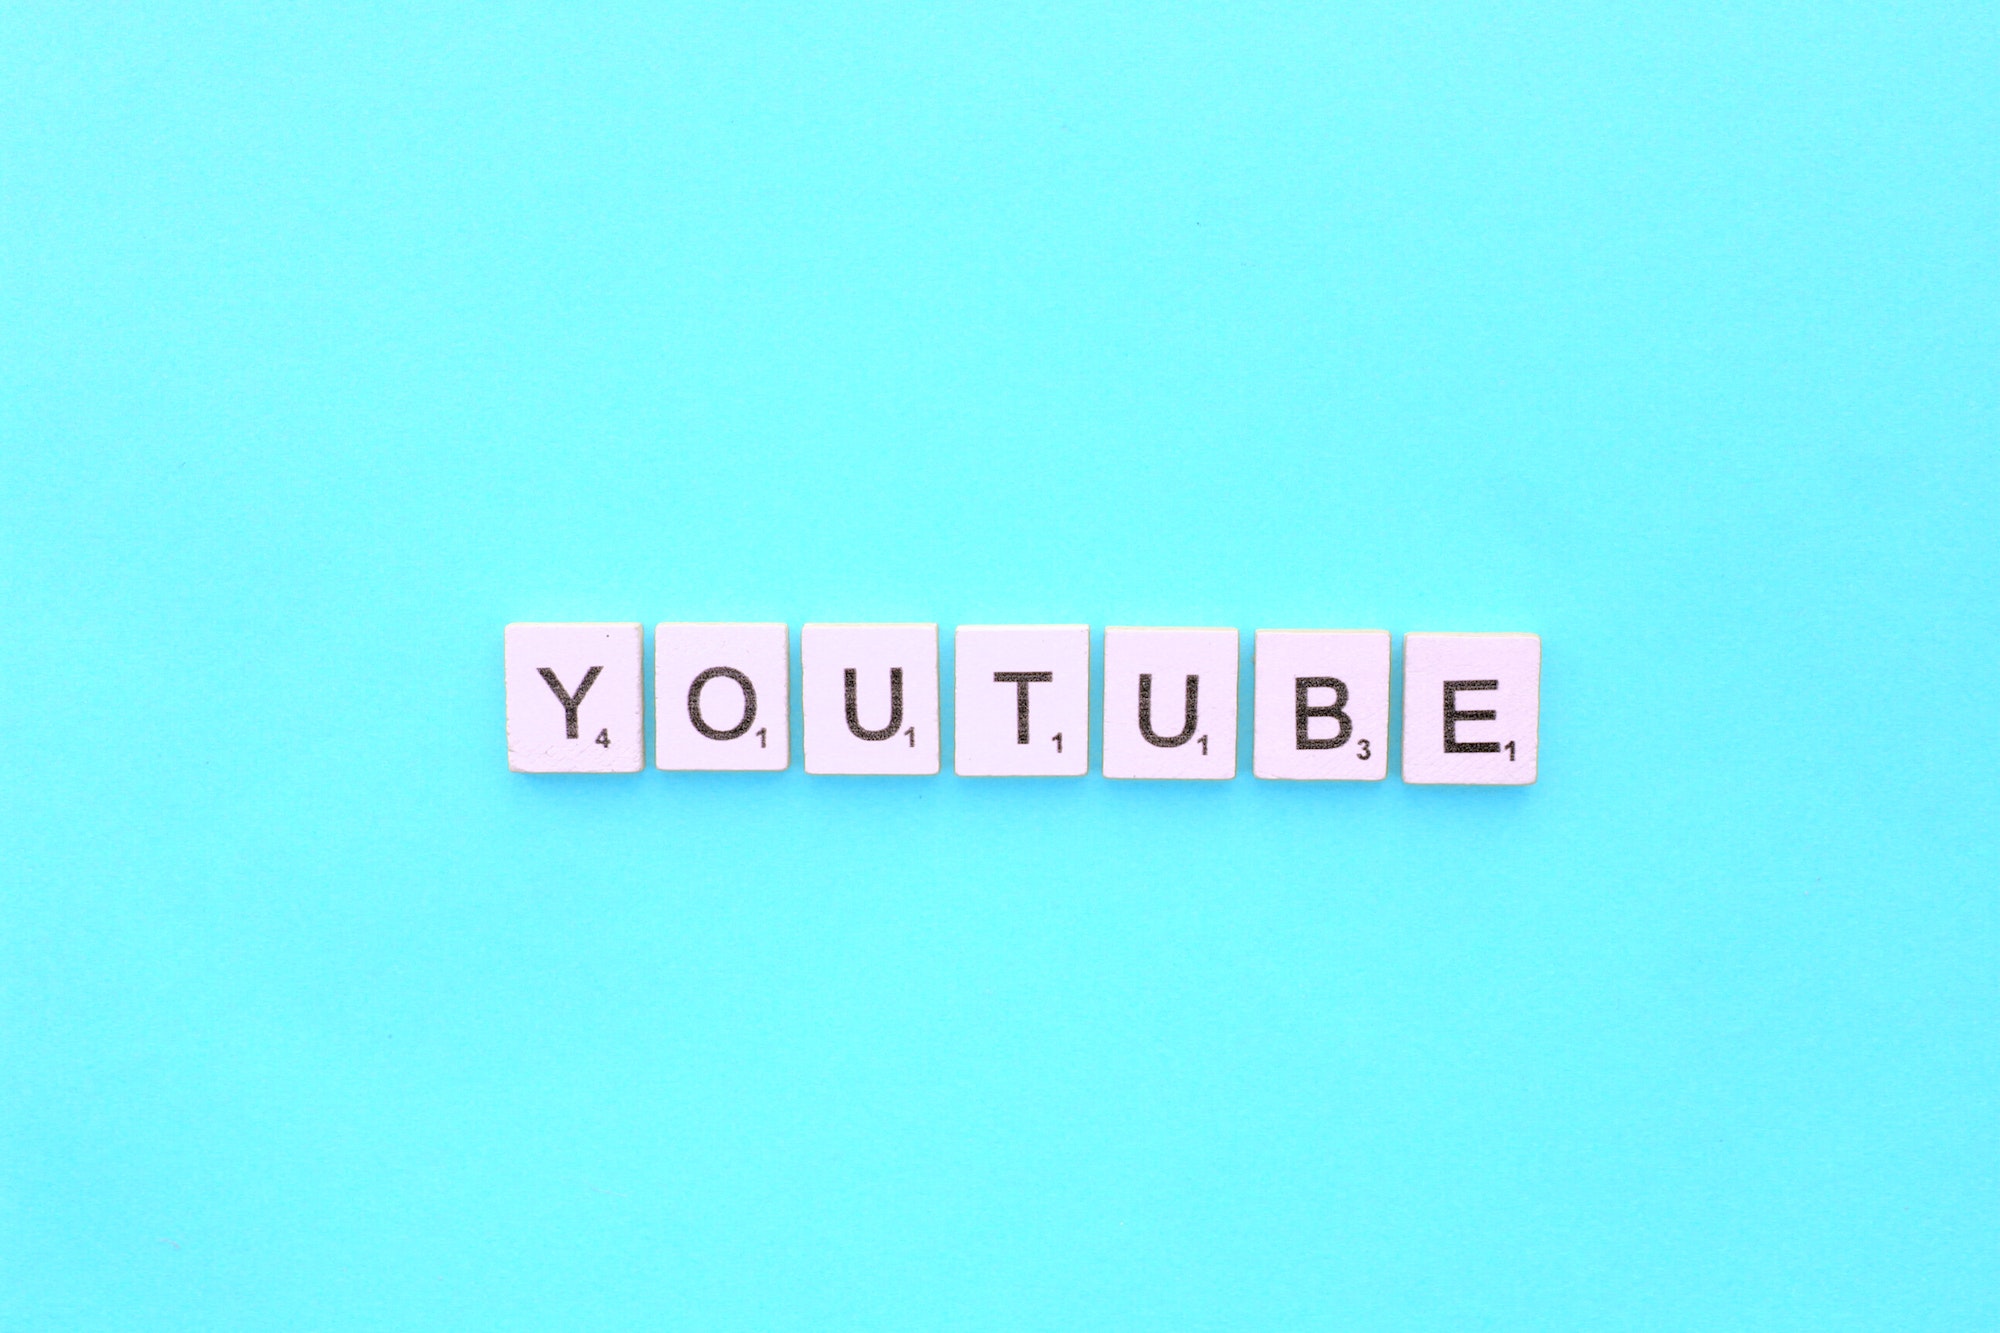 YouTube scrabble letters word on a light blue background